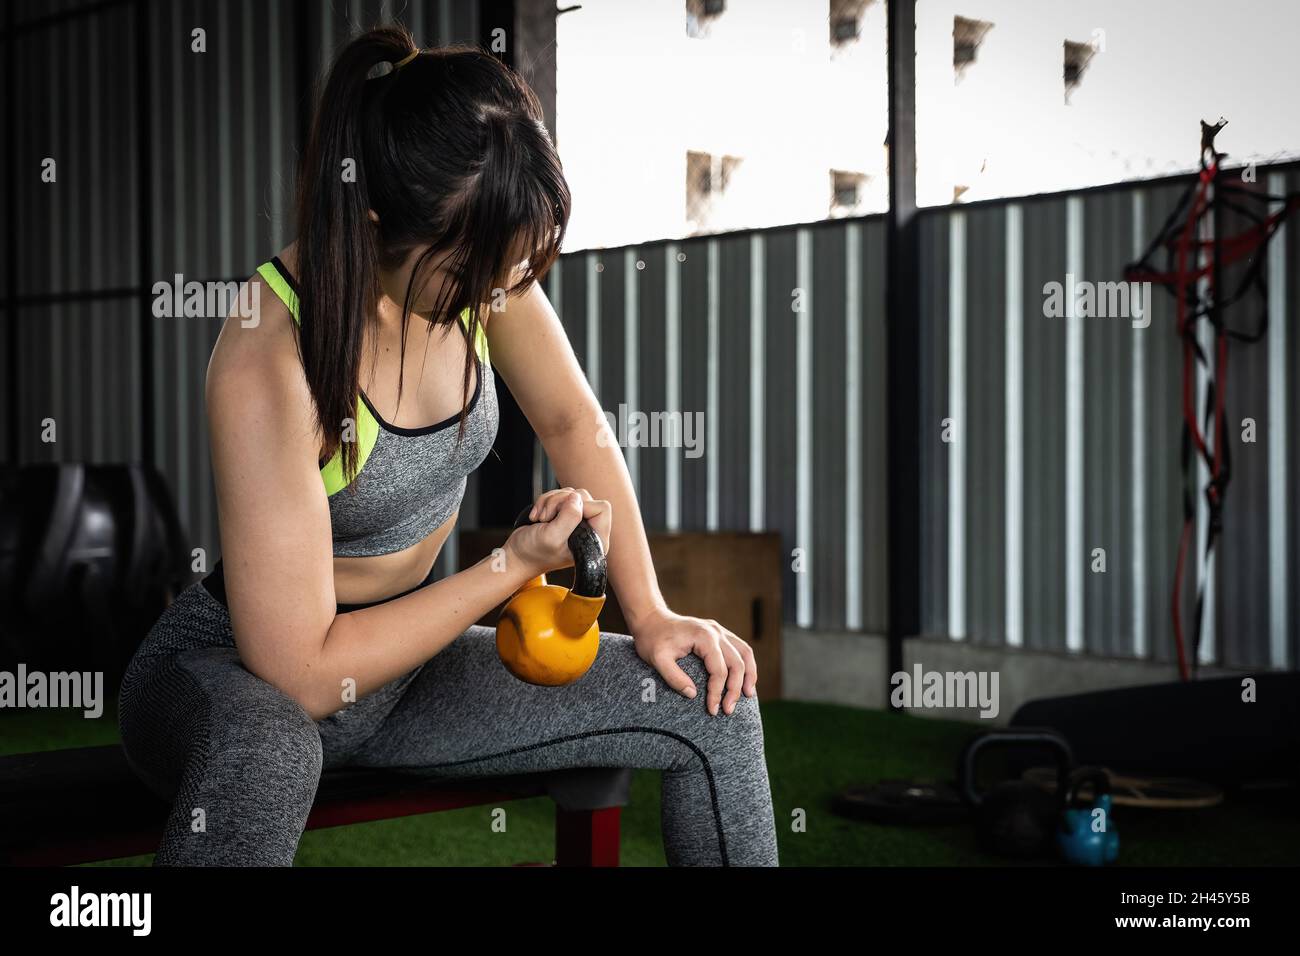 Young asian female enjoy exercising with lifting kettle bell with one hand at the gym. sport bodybuilding concept. Stock Photo